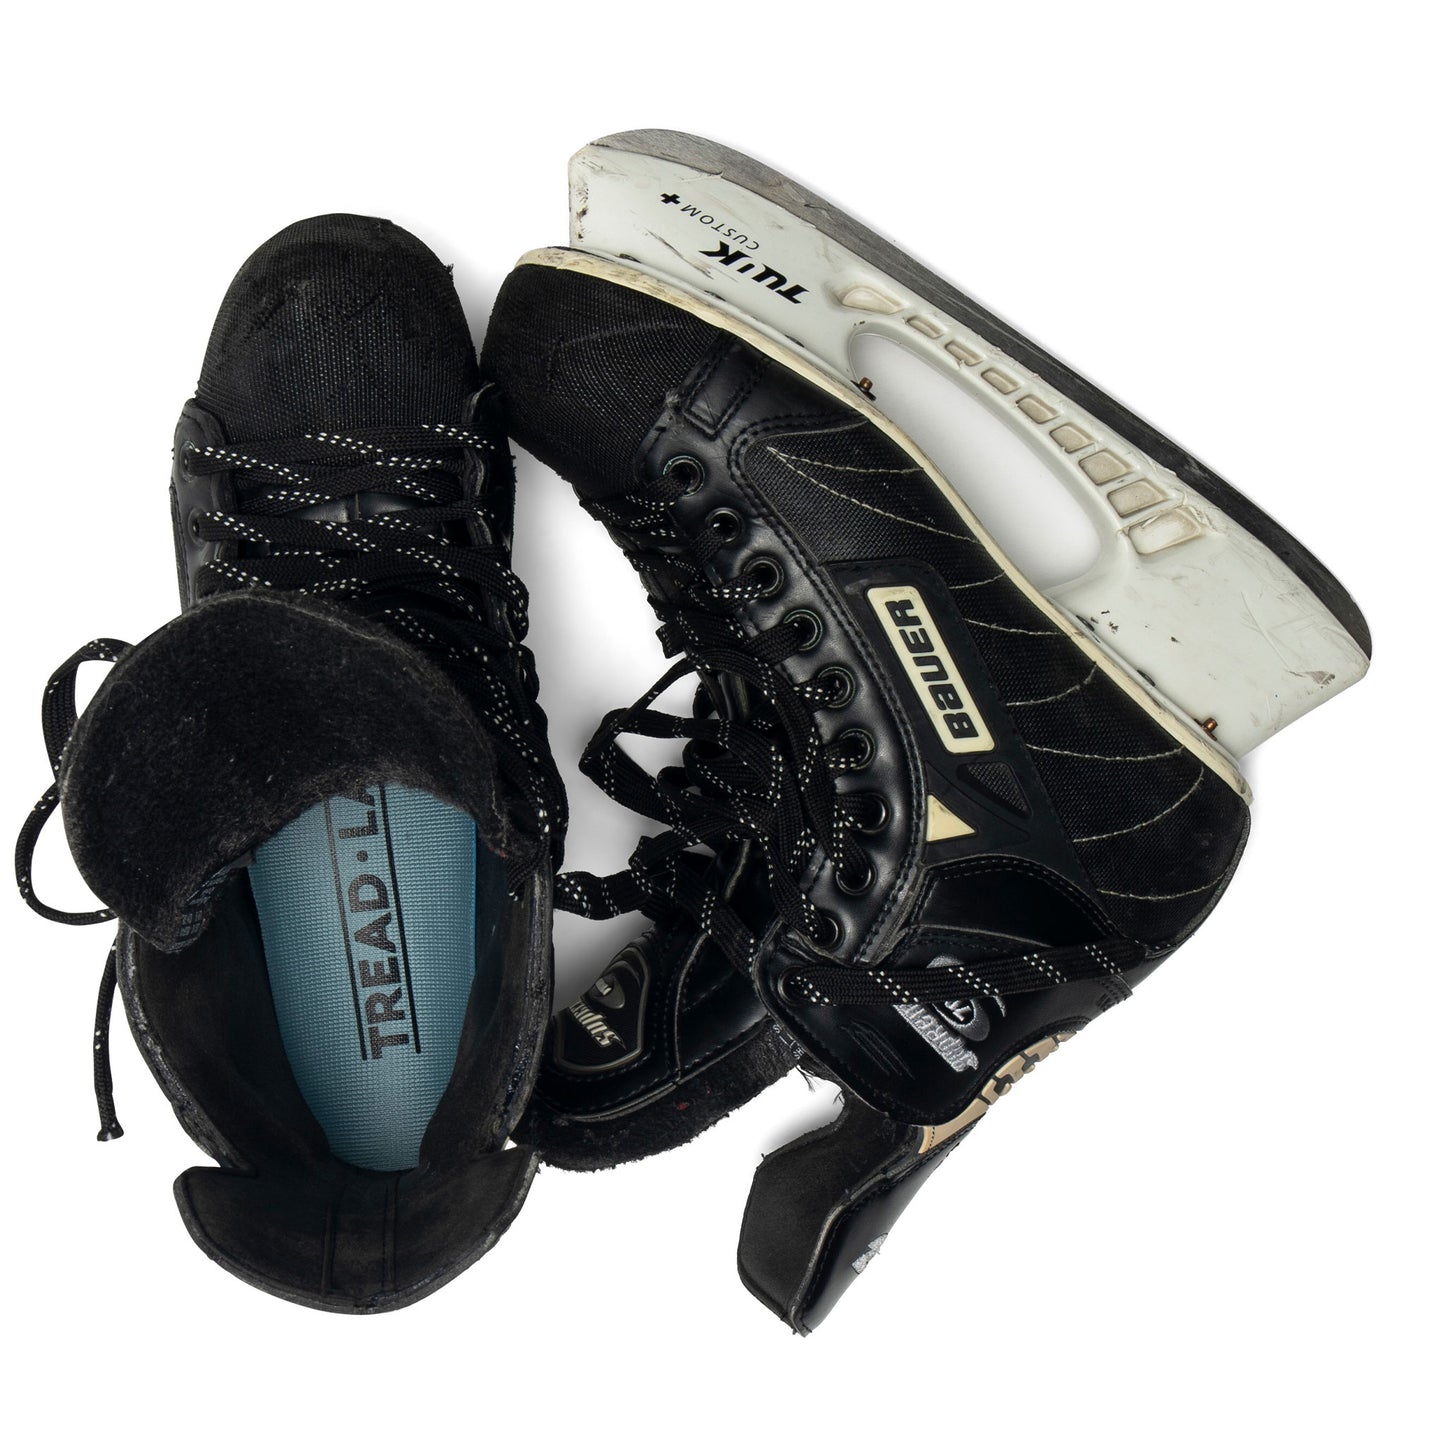 Pace Thin Insole For Hockey Skates